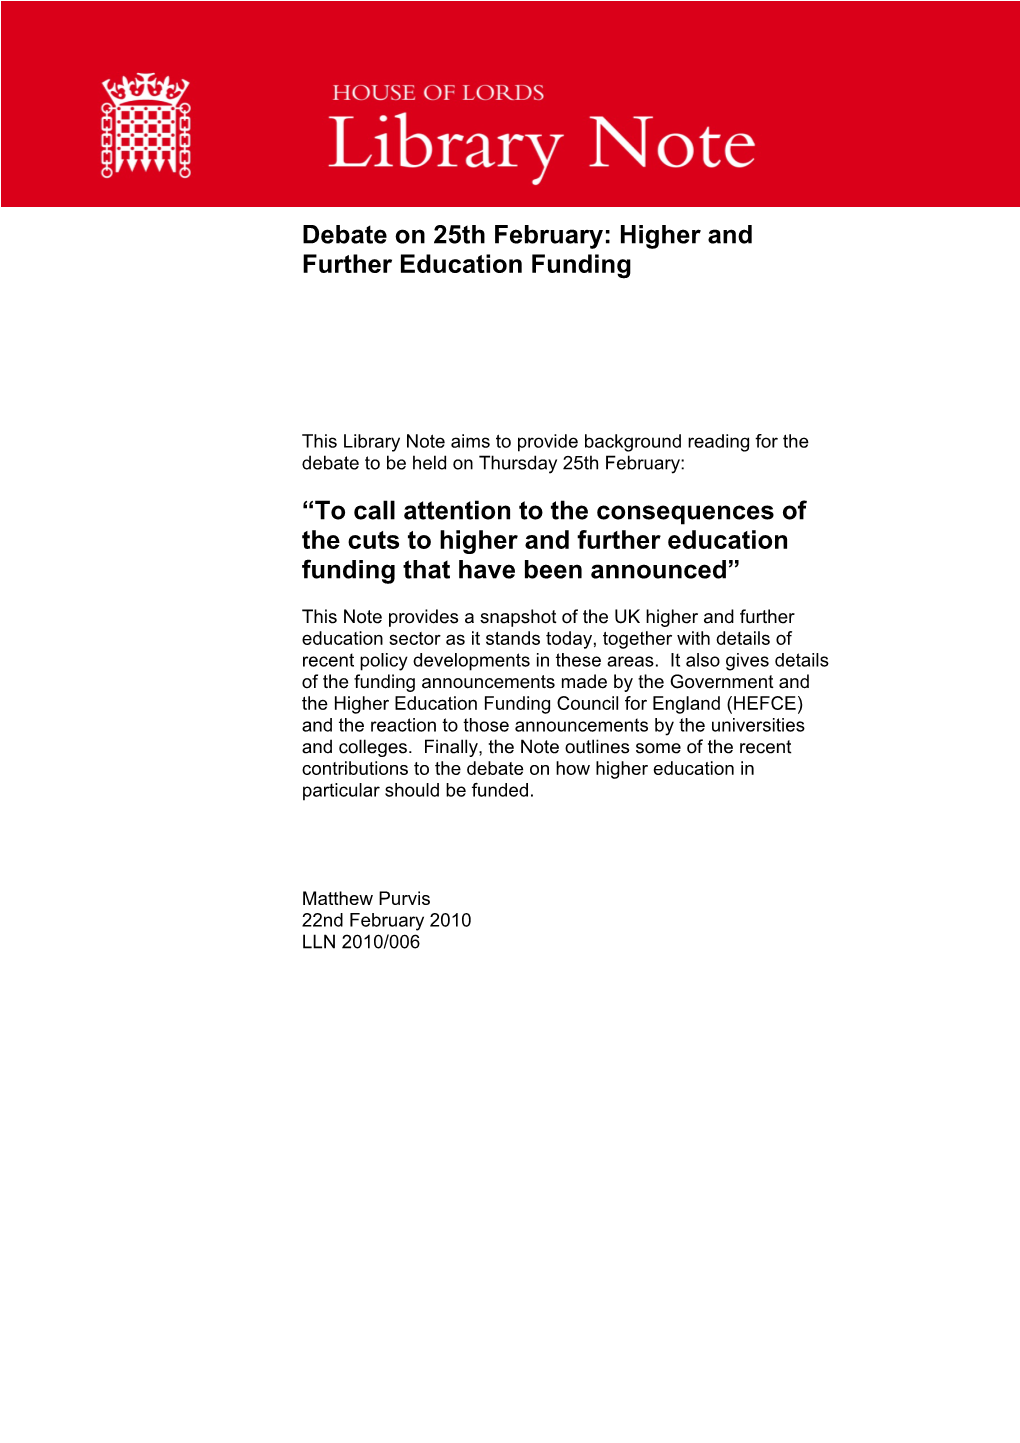 Higher and Further Education Funding